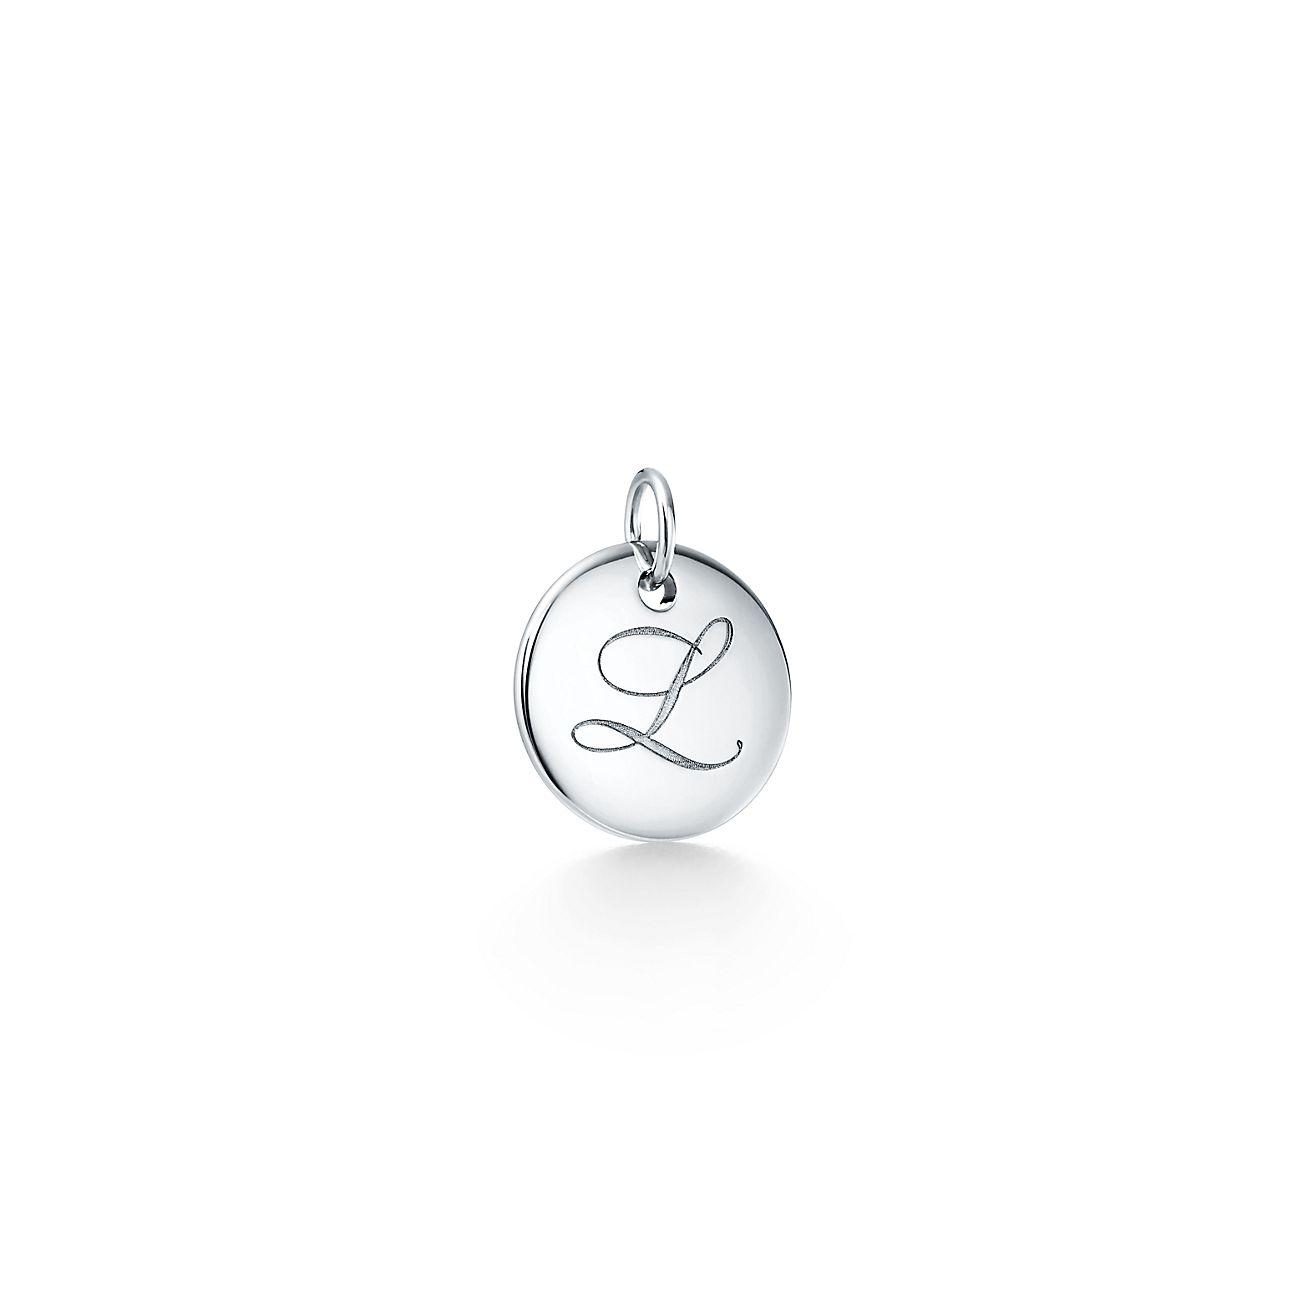 Tiffany Notes L Disc Charm in Silver, A 